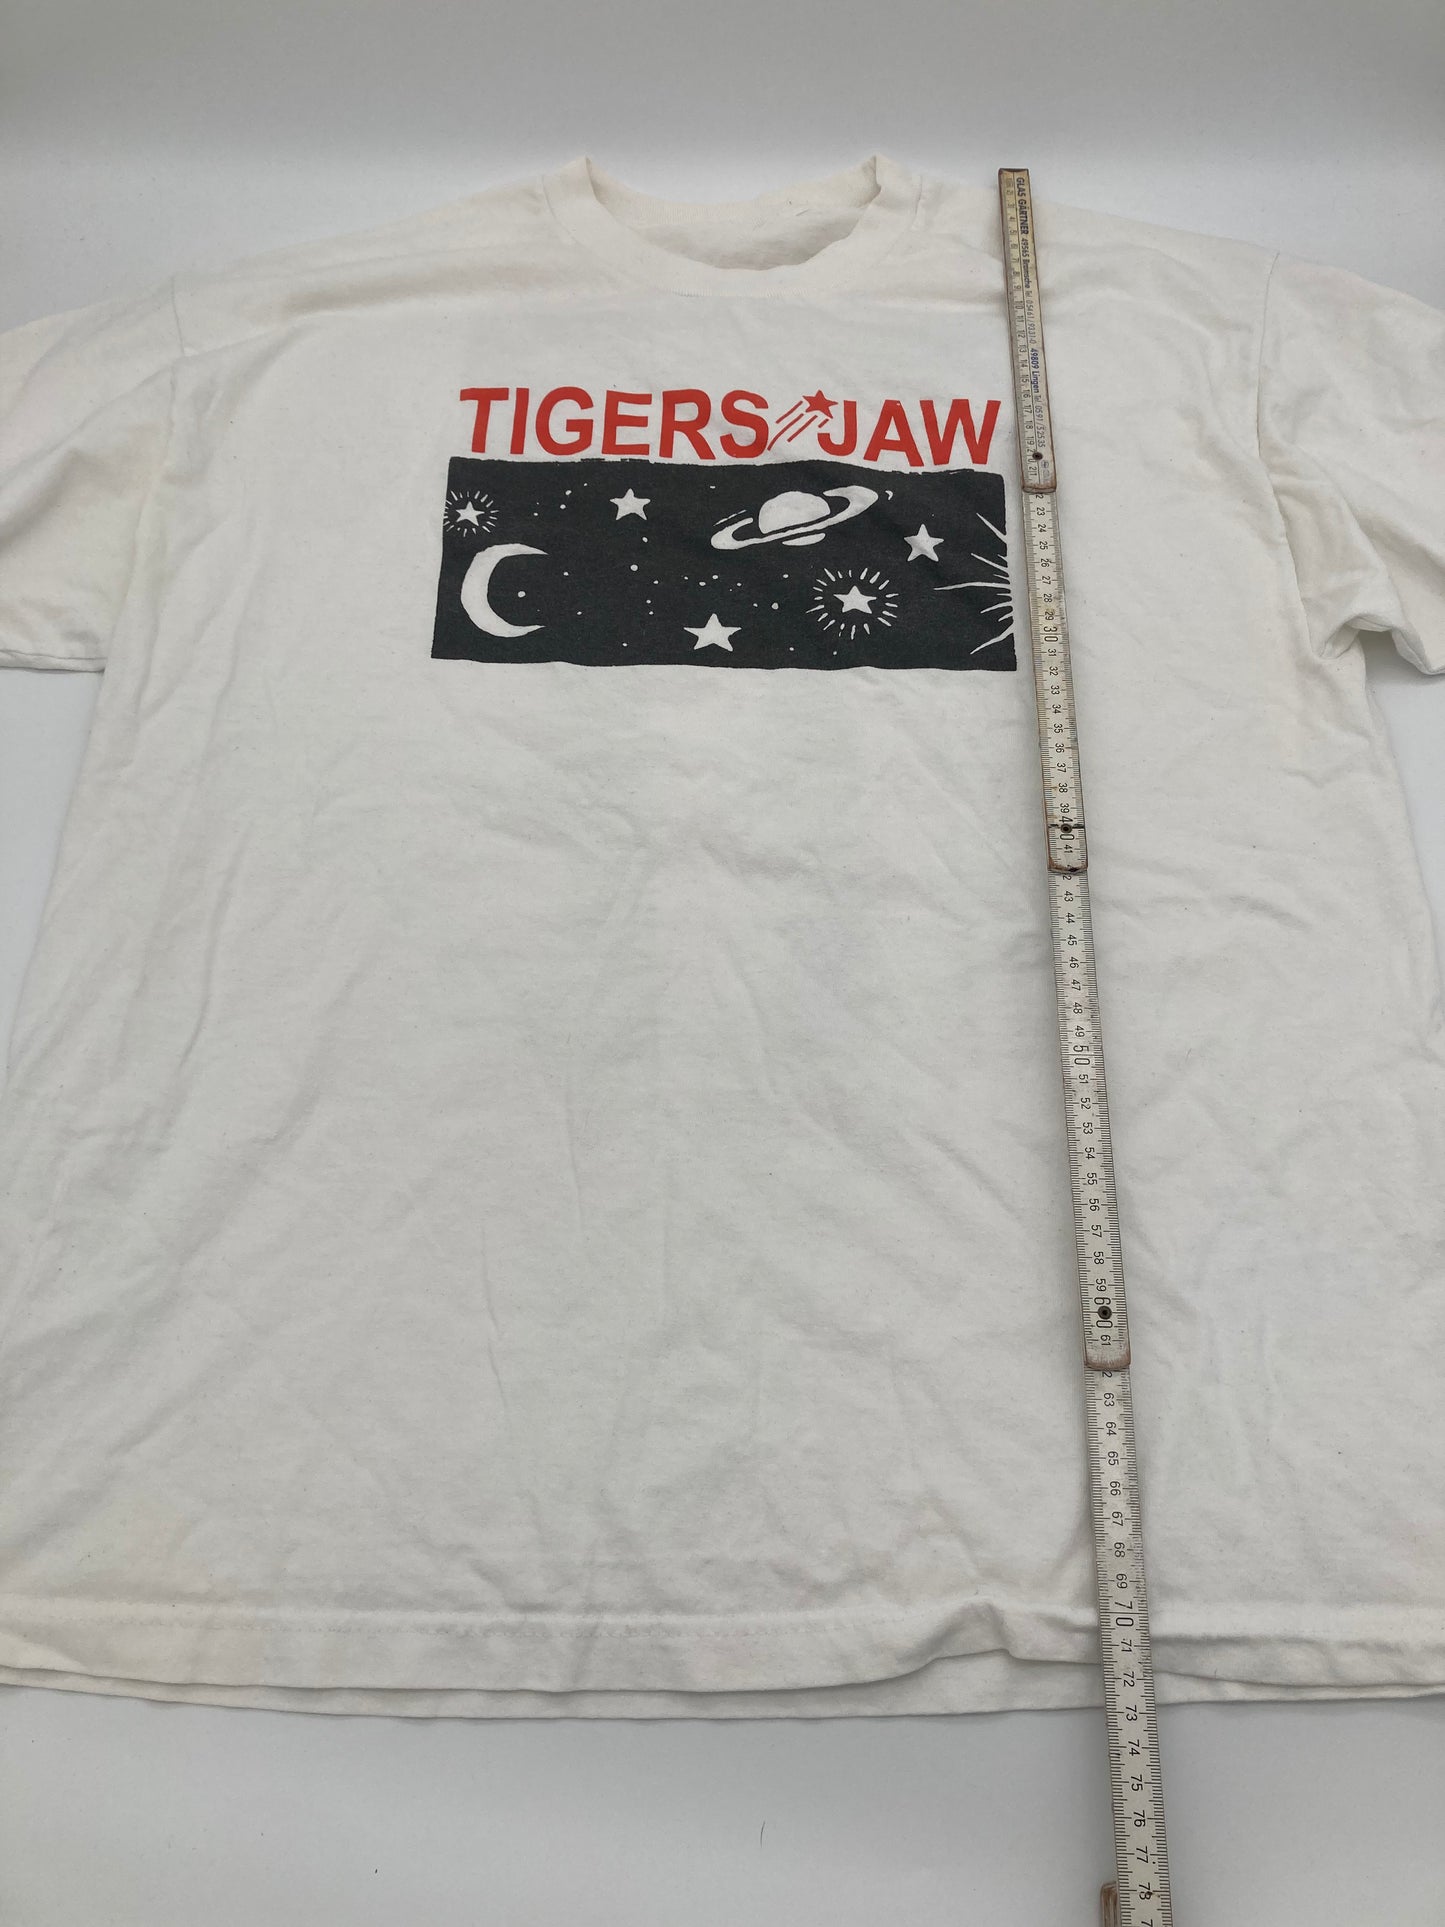 TIGERS JAW • Spring Tour 2015 • T-Shirt • L • Second Hand